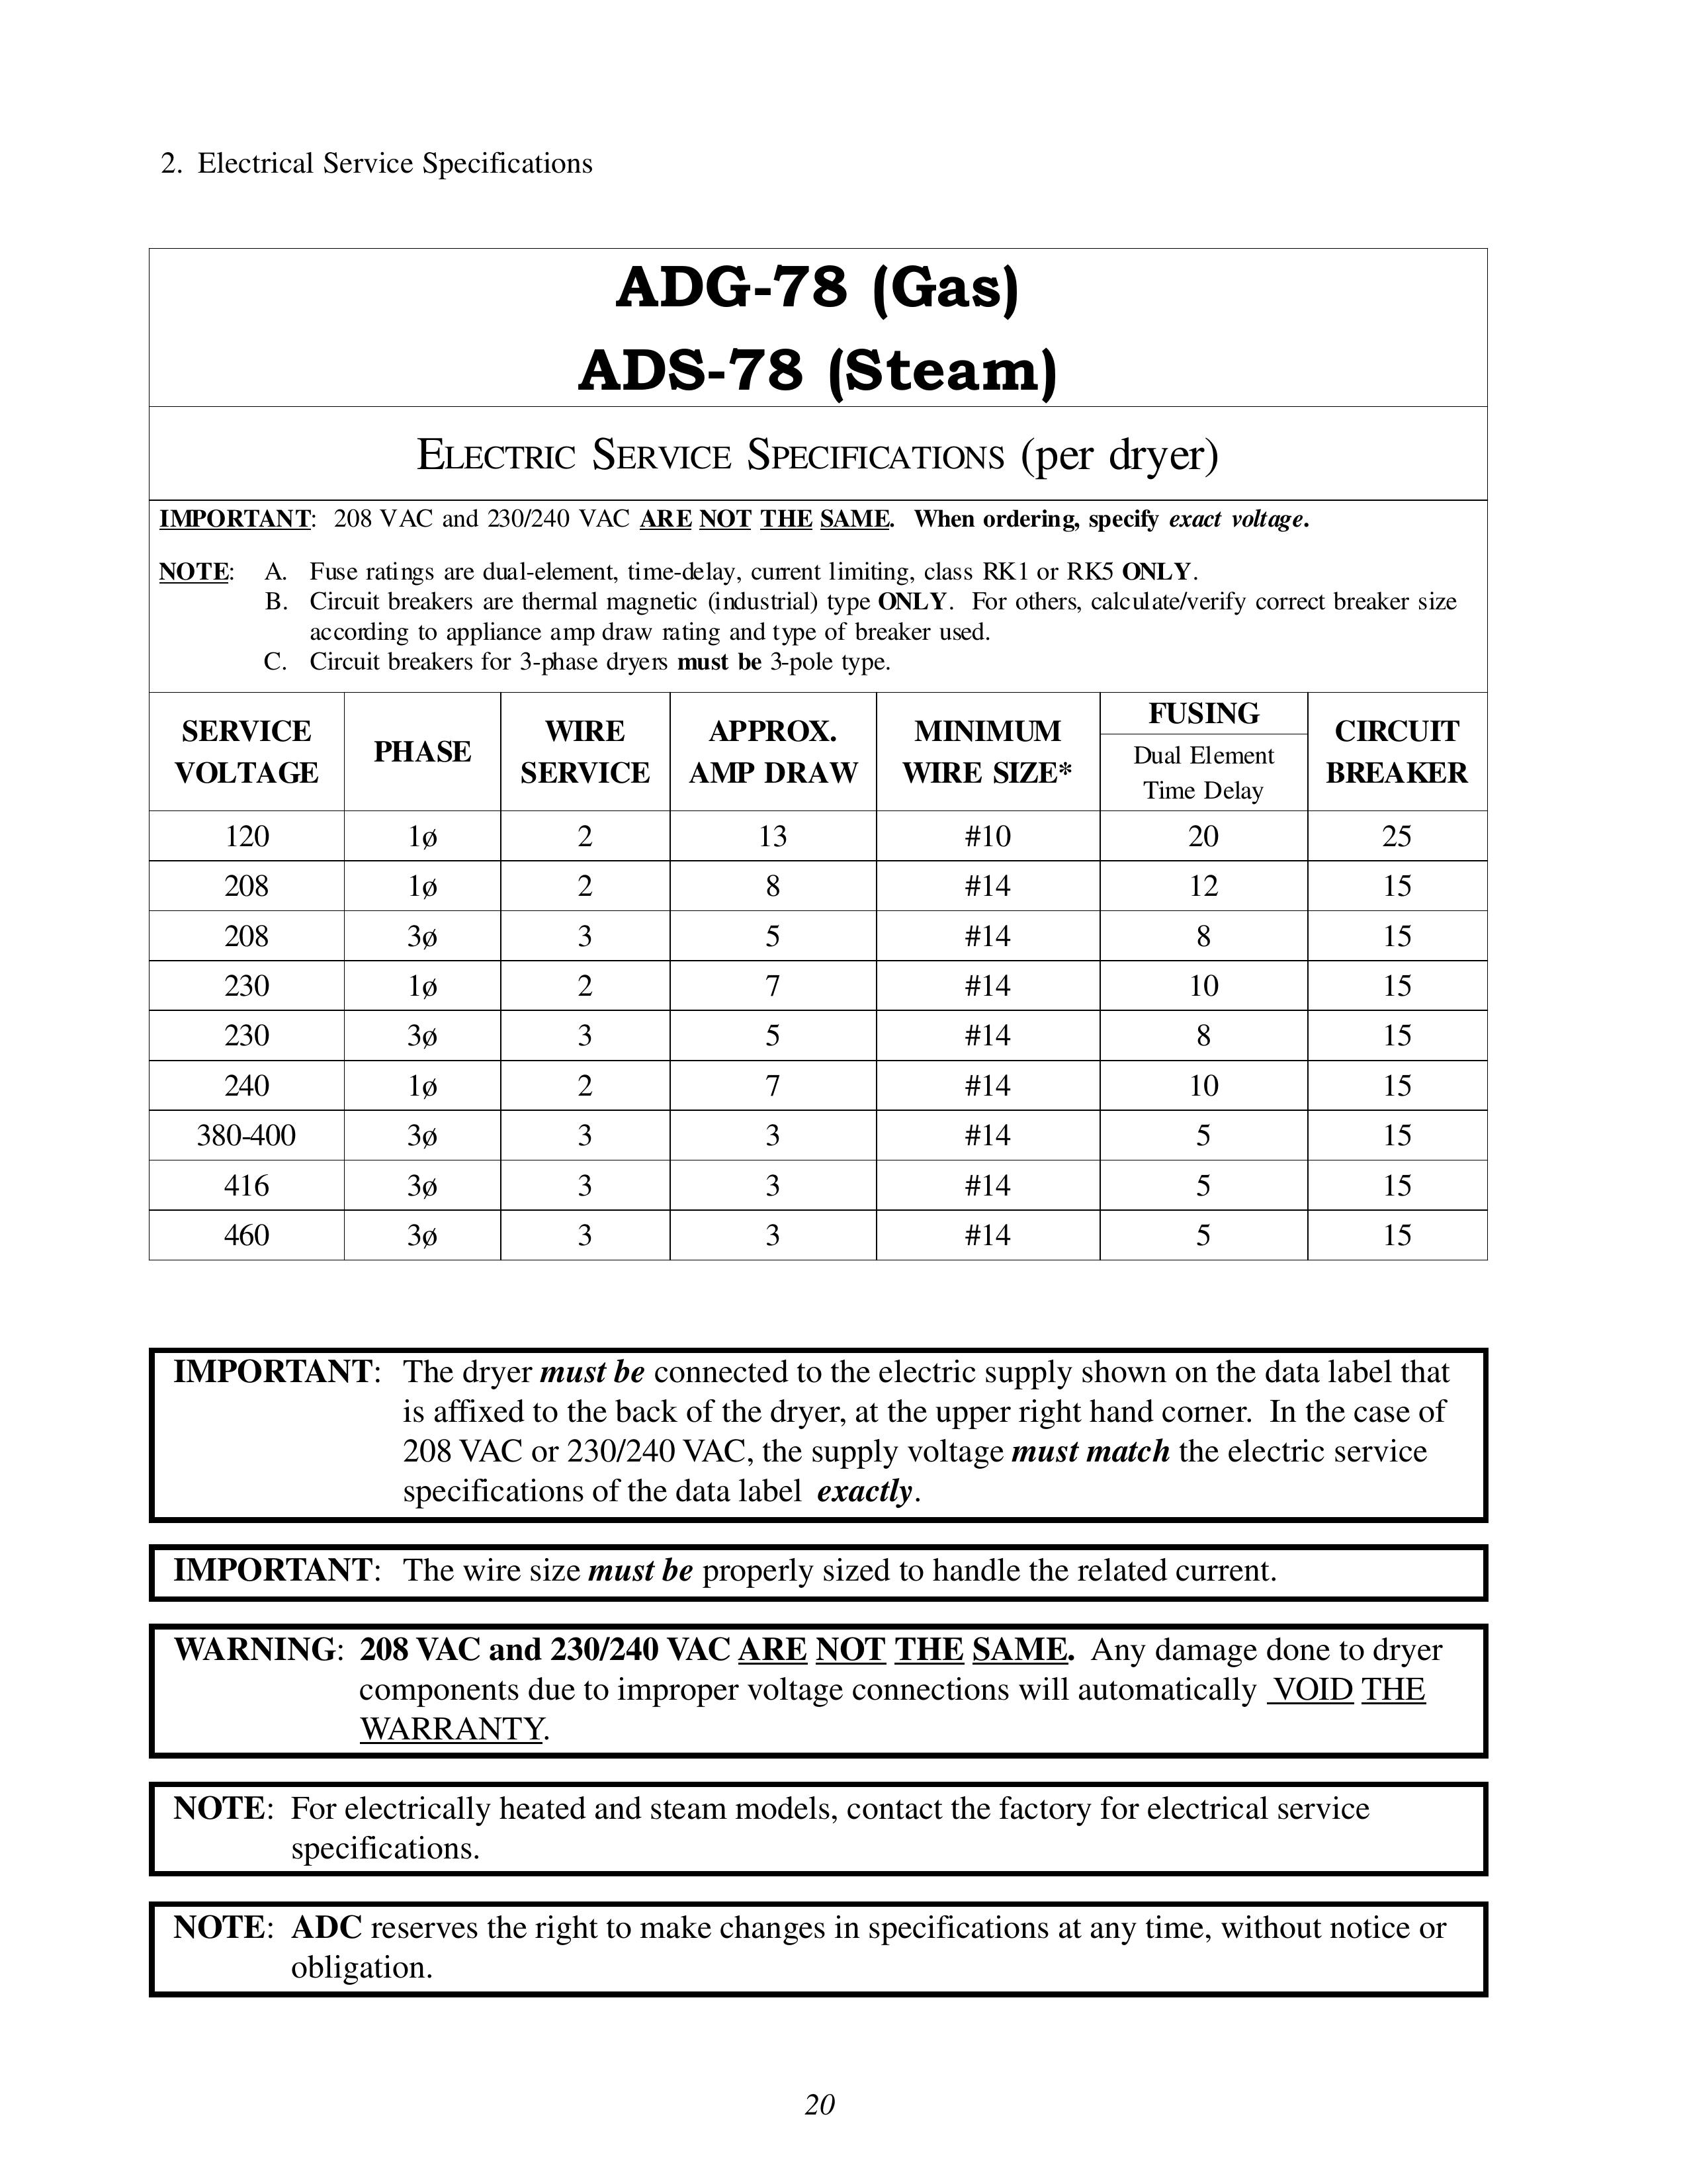 ADC AD-78 Clothes Dryer User Manual (Page 24)